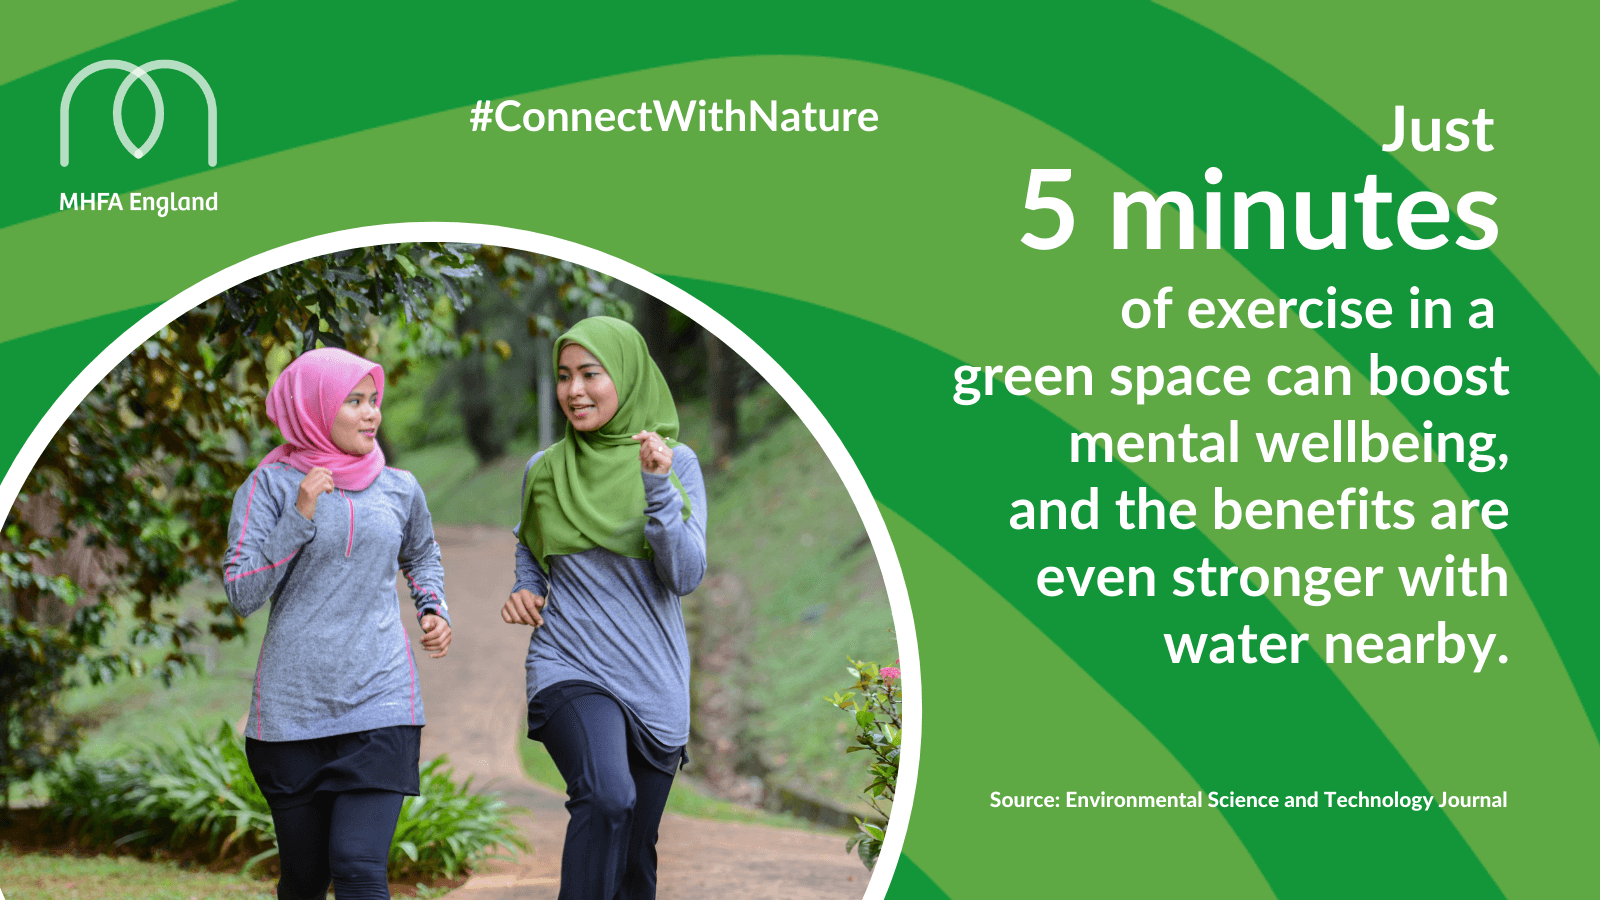 Just 5 minutes of exercise in a green space can boost mental wellbeing, and the benefits are even stronger with water nearby. Source: Environmental Science and Technology Journal